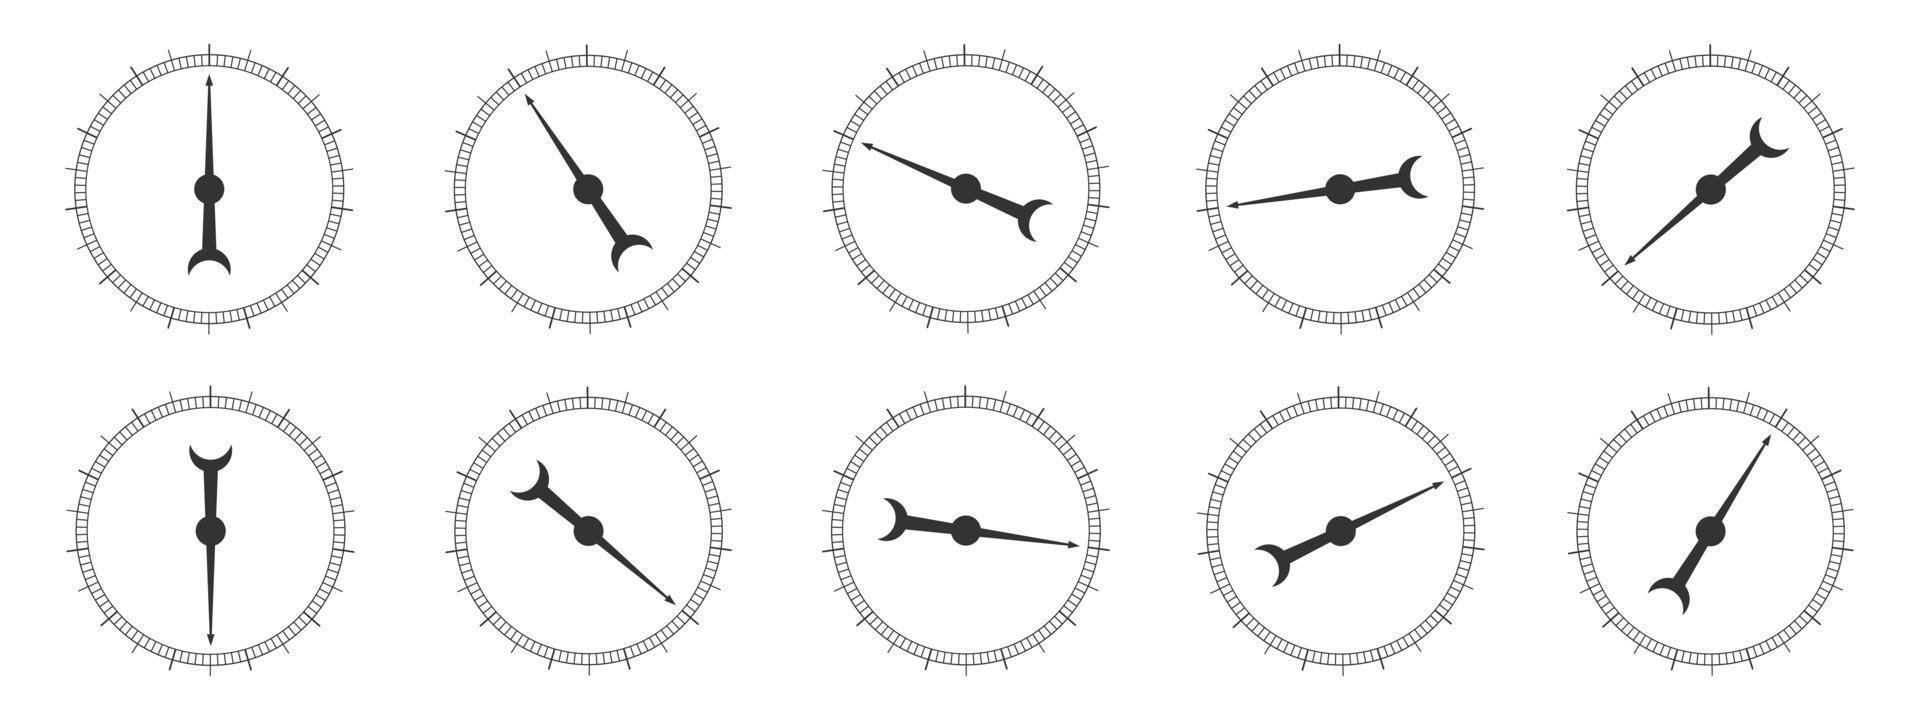 Set of round measuring scales with rotating arrows. Collection of 360 degree of barometer, compass, protractor, circular ruler tool template vector